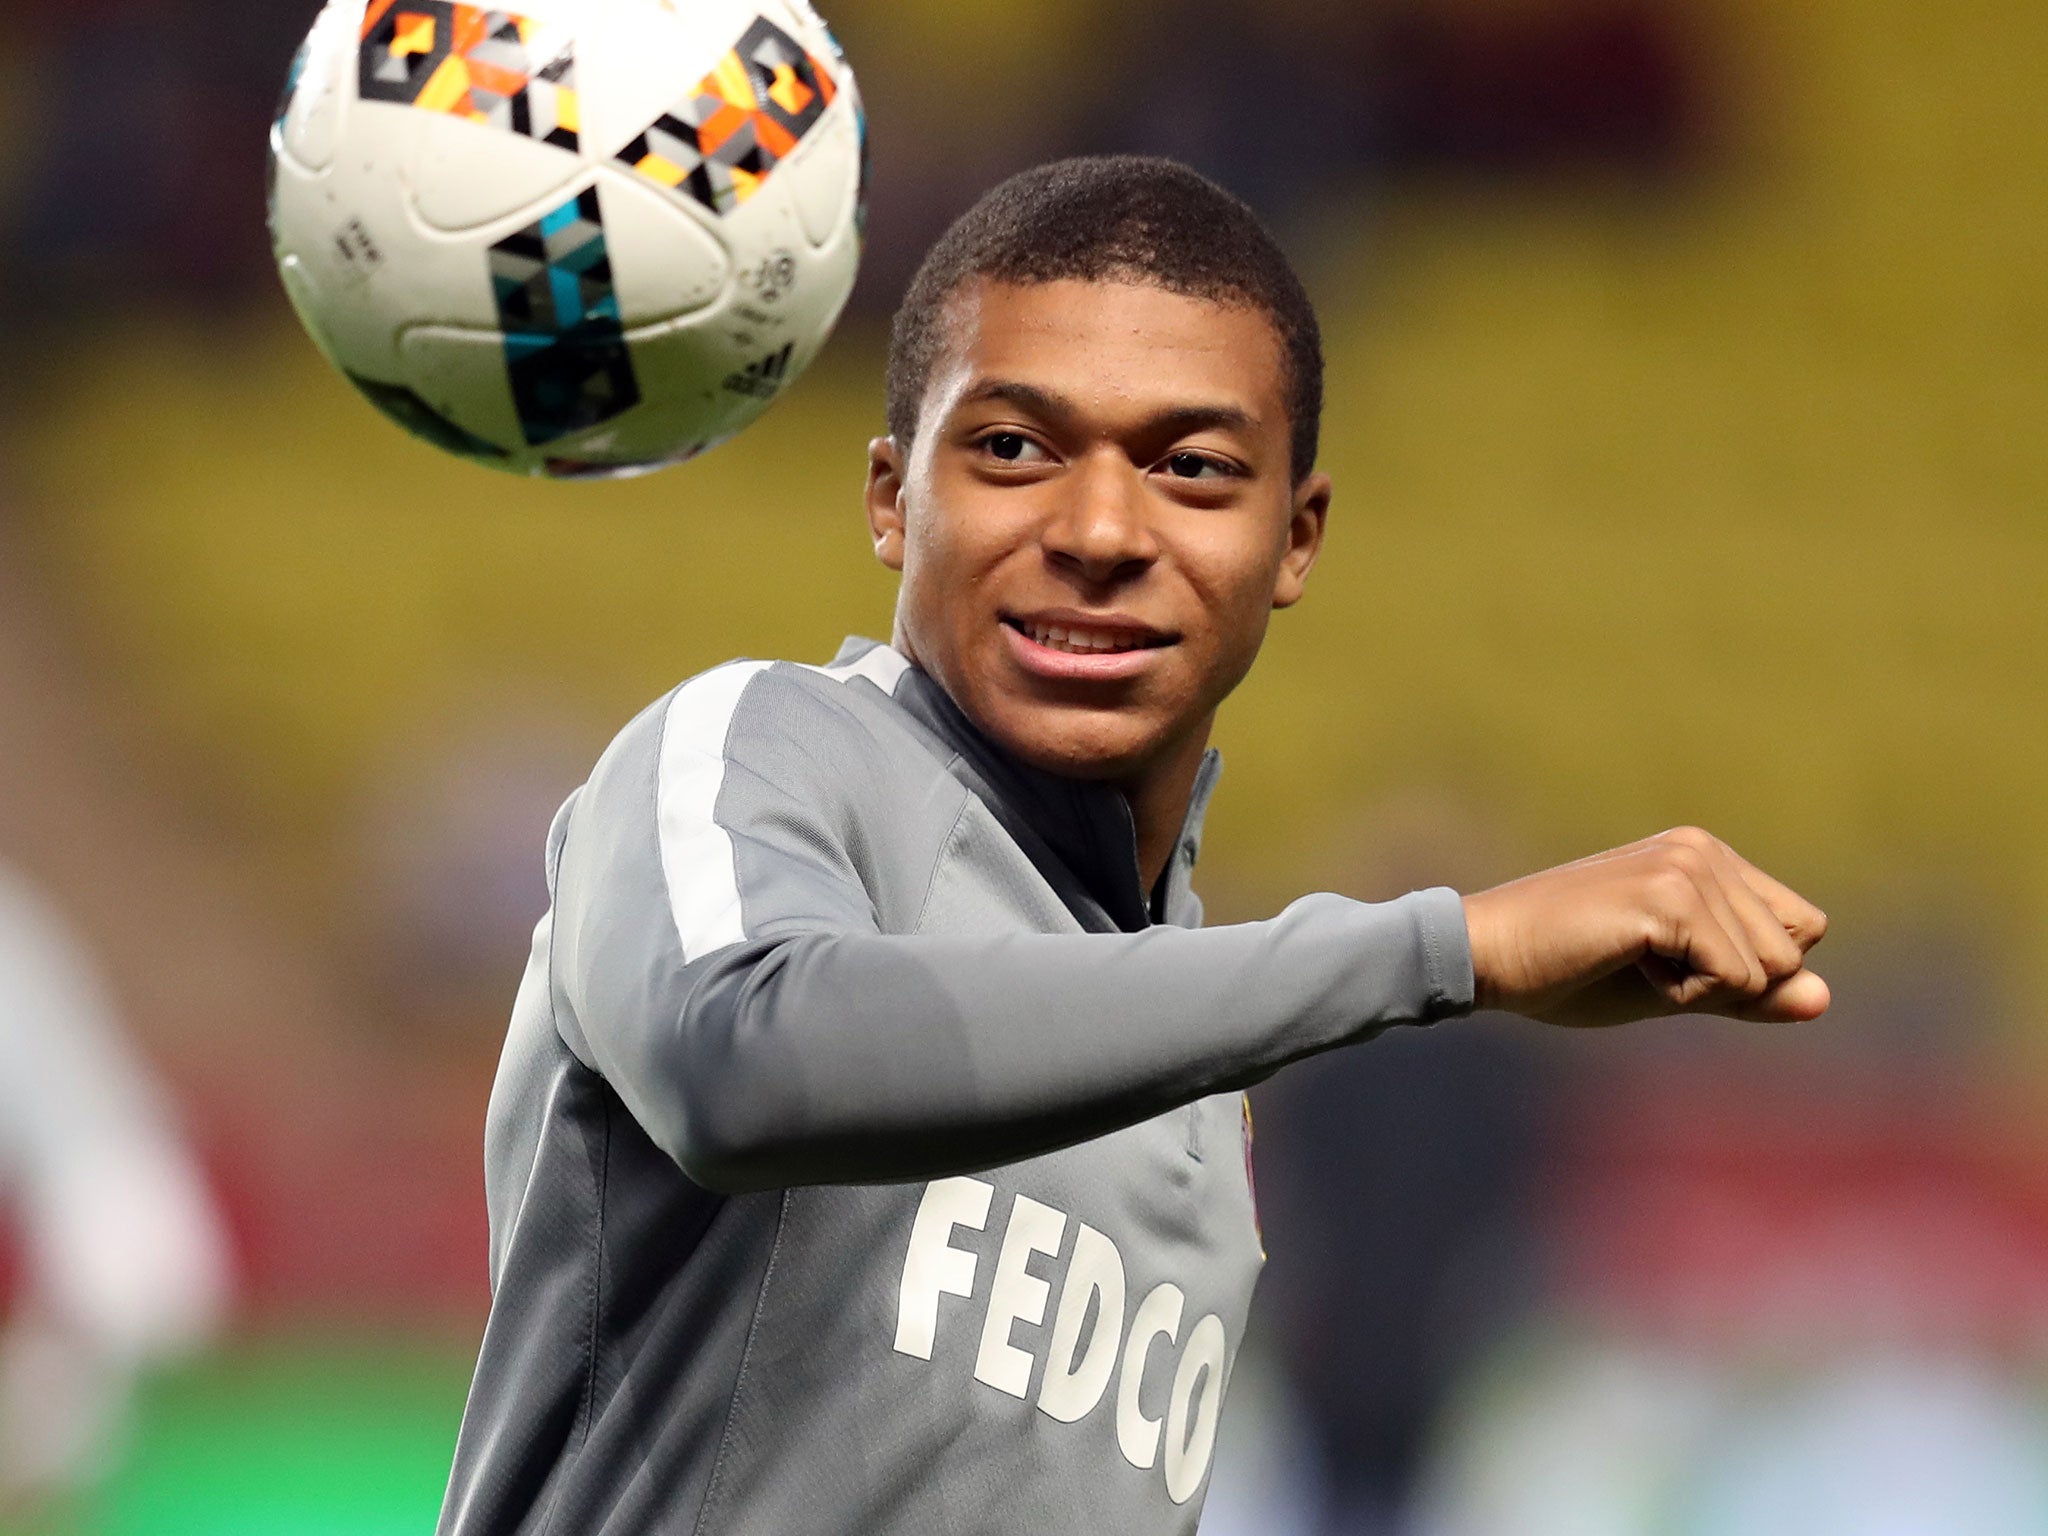 Mbappe has scored 22 goals from 36 appearances this season